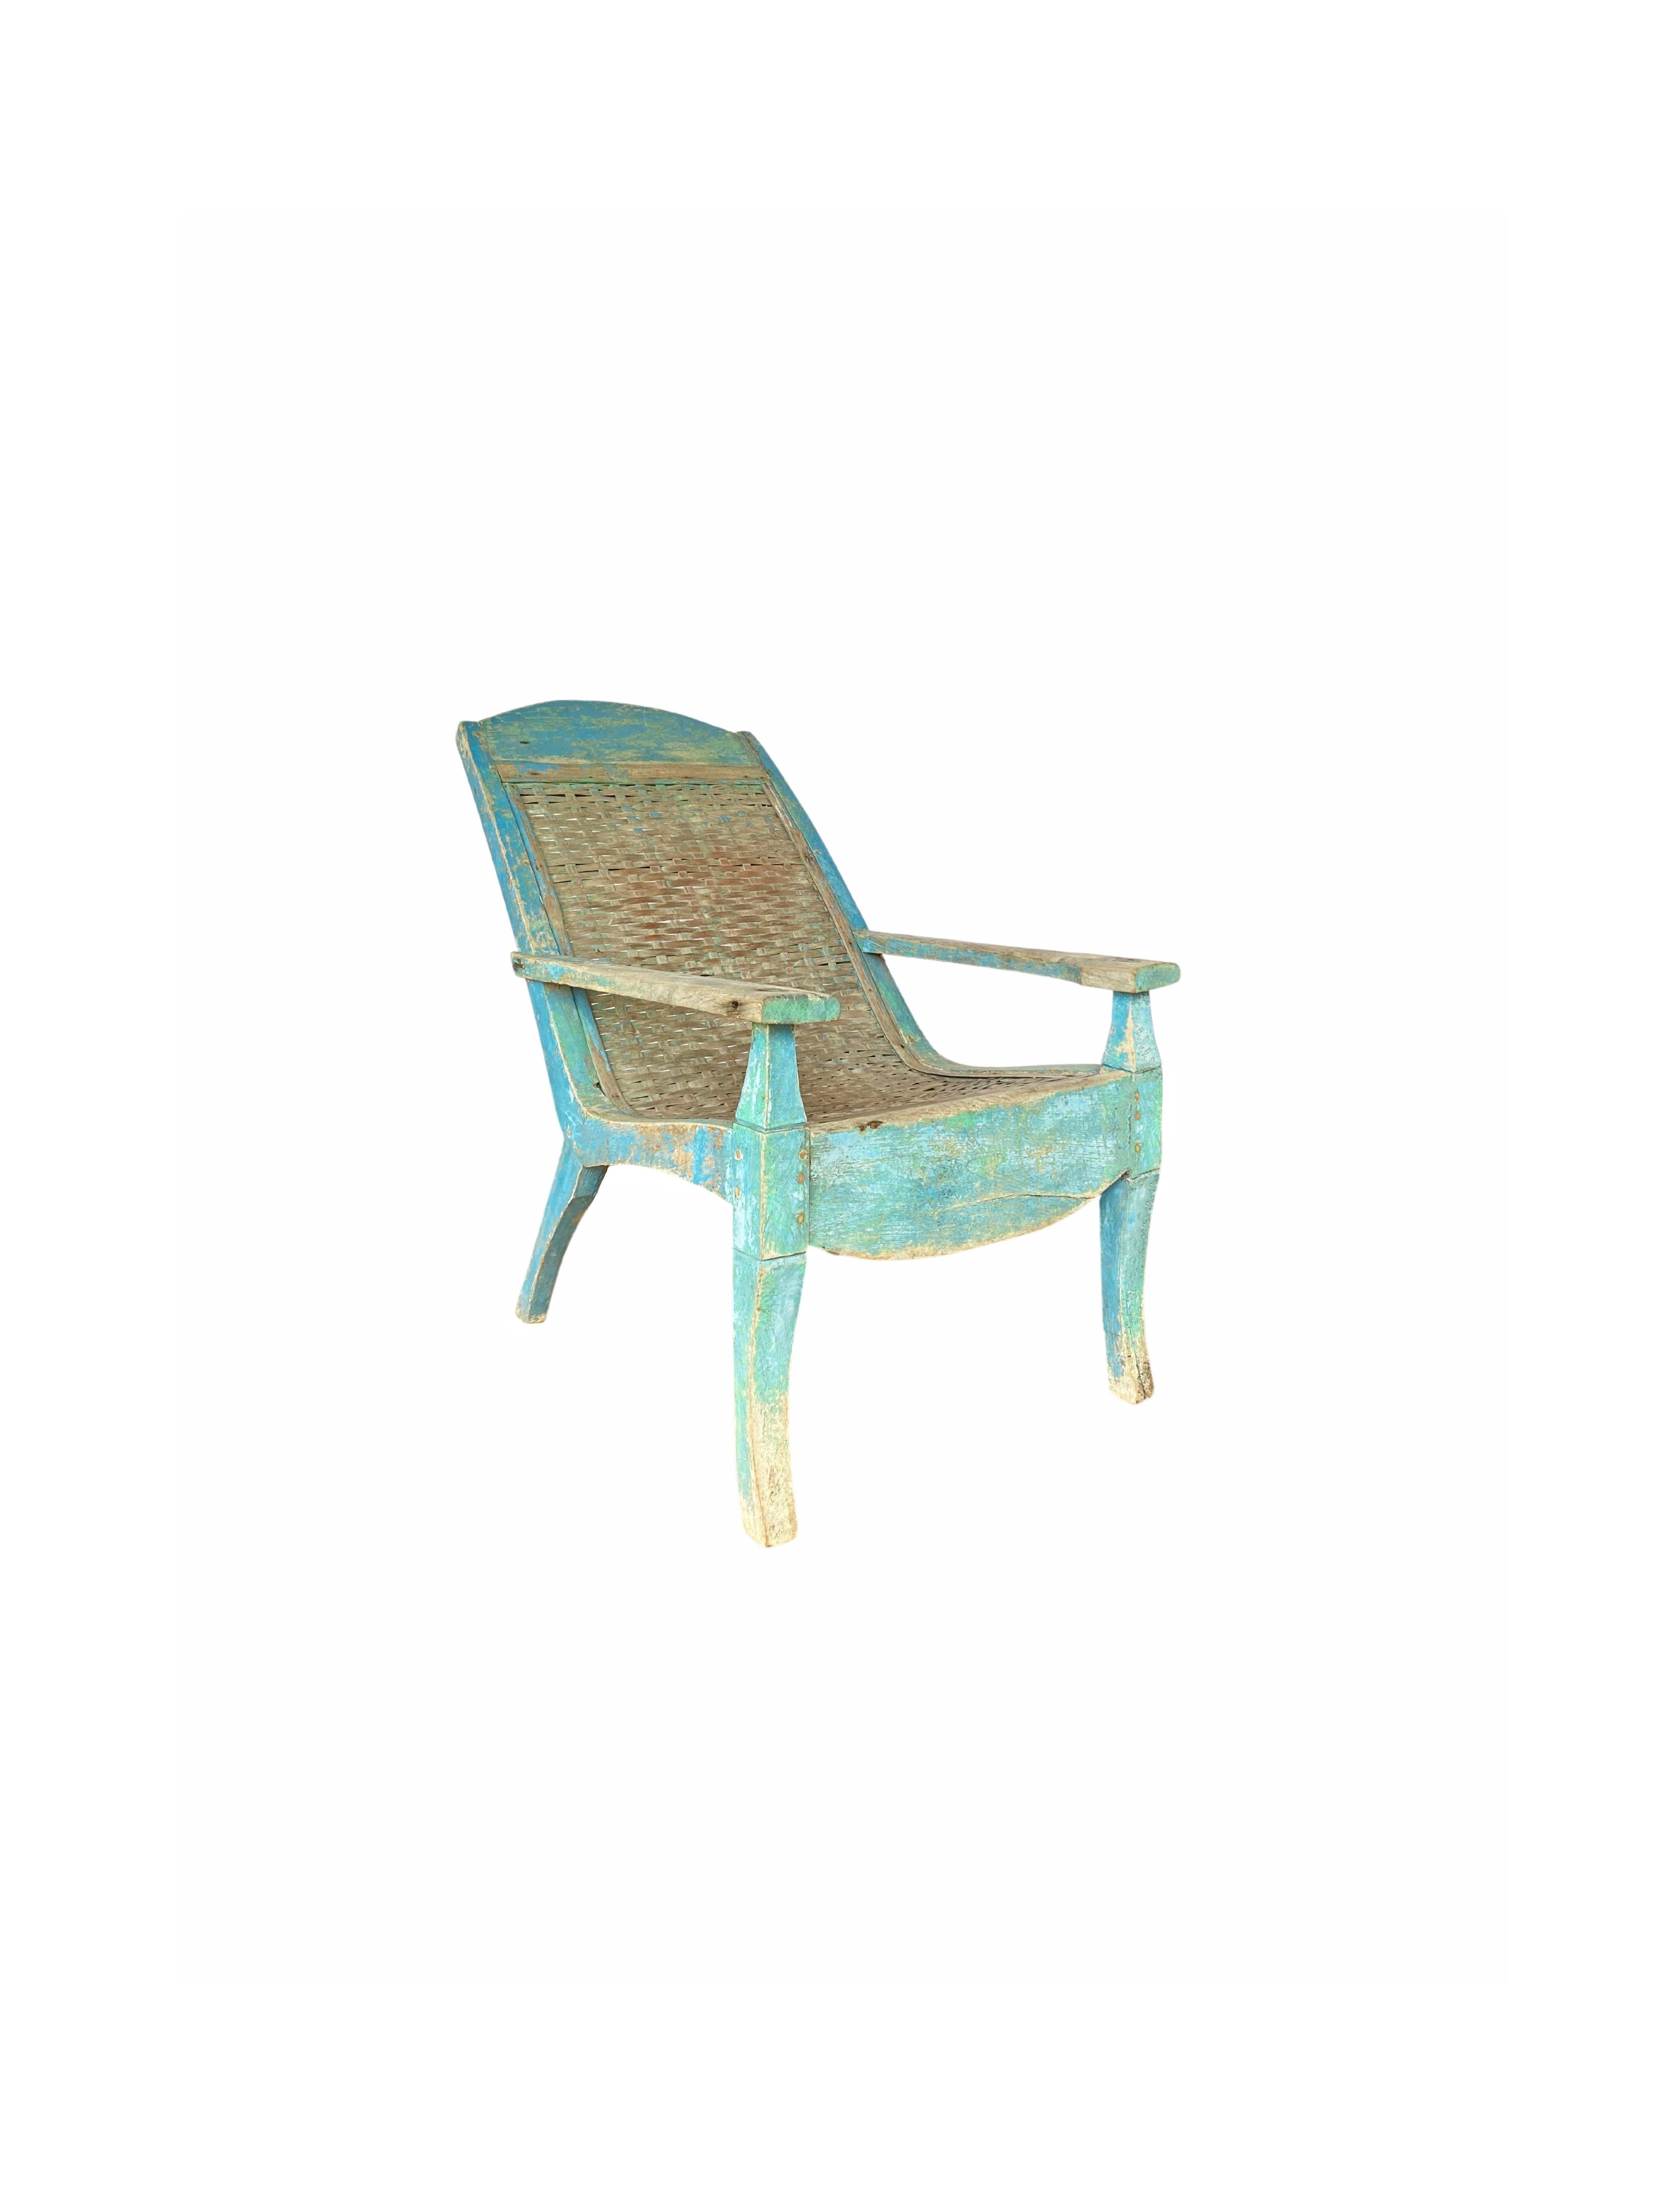 An elegant teak wood and bamboo woven seat plantation chair from the island of Madura, Java, Indonesia. This chair features a wonderful faded blue polychrome and age related patina. A unique and colourful example of Indonesian colonial